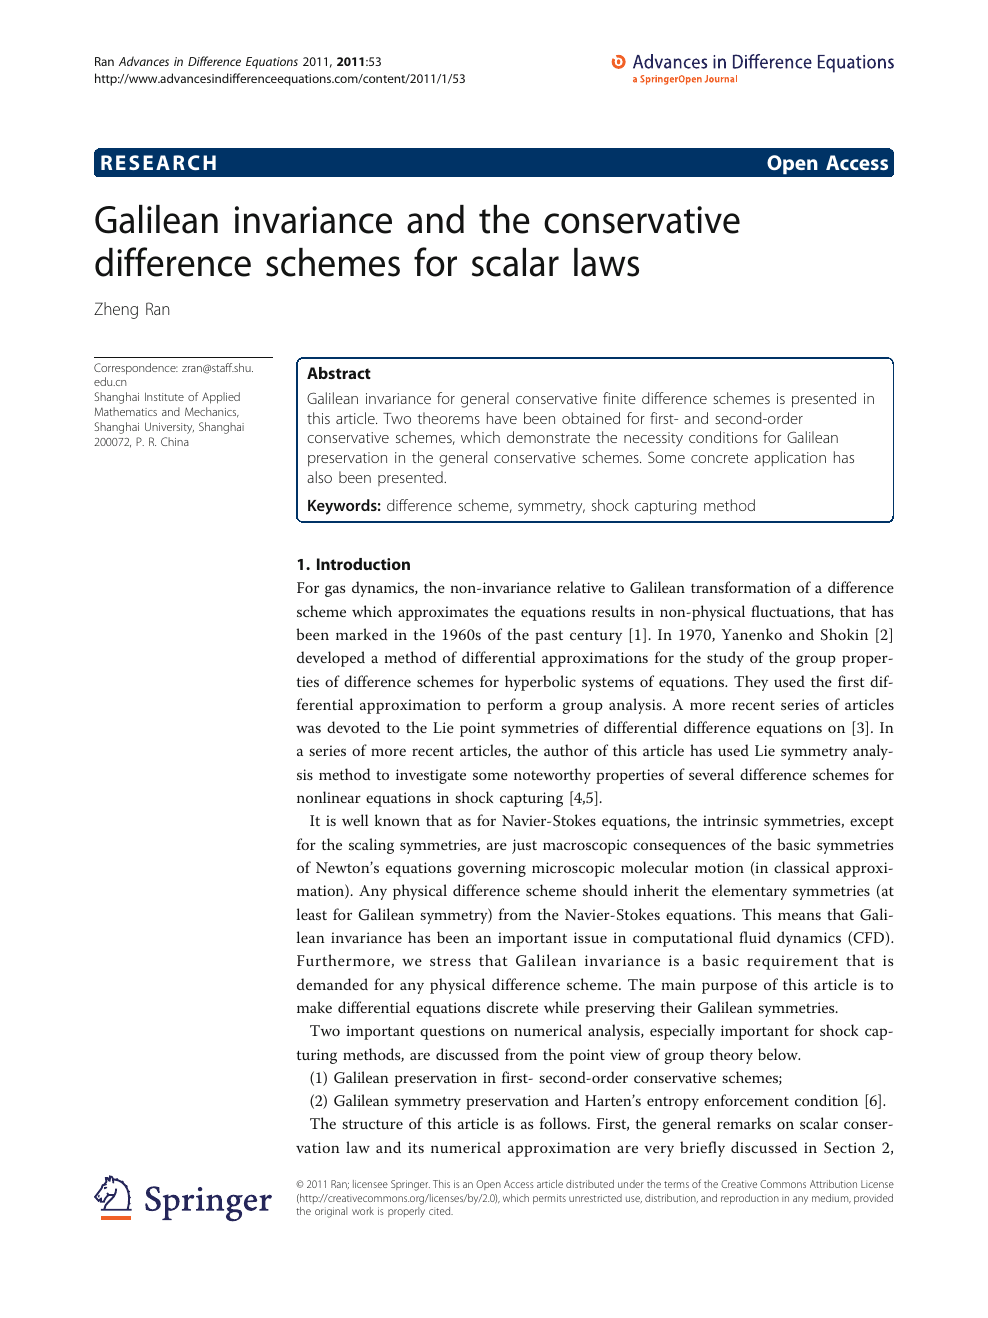 Galilean Invariance And The Conservative Difference Schemes For Scalar Laws Topic Of Research Paper In Mathematics Download Scholarly Article Pdf And Read For Free On Cyberleninka Open Science Hub